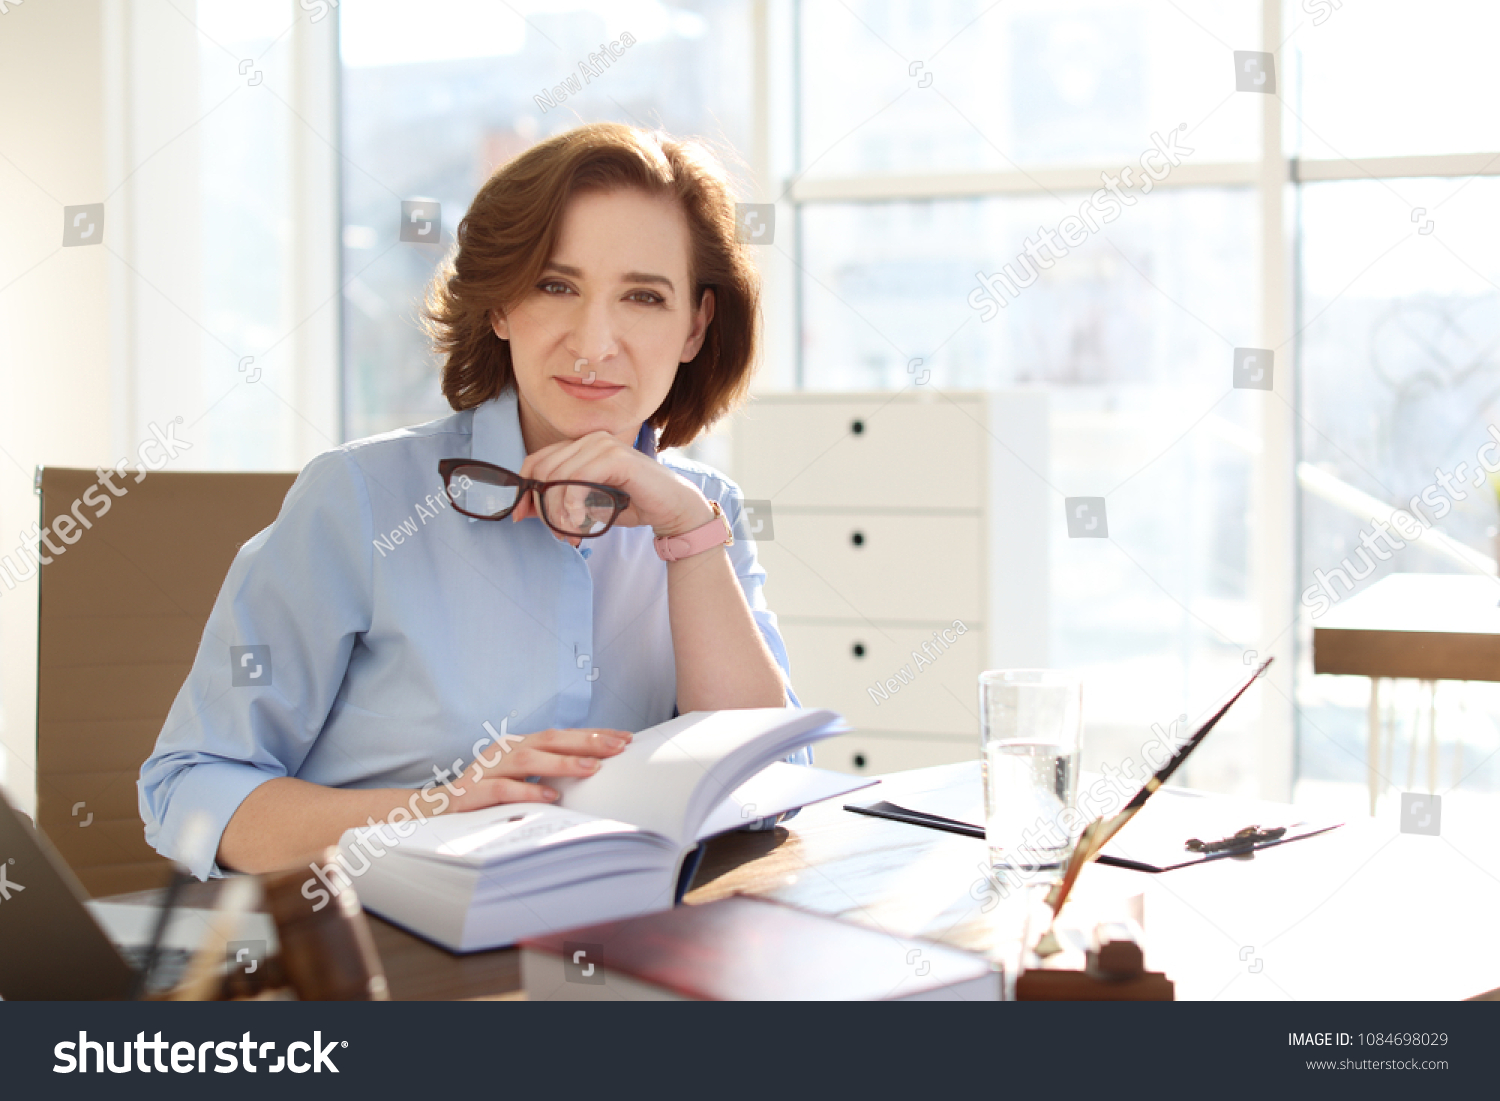 Female lawyer working at table in office #1084698029